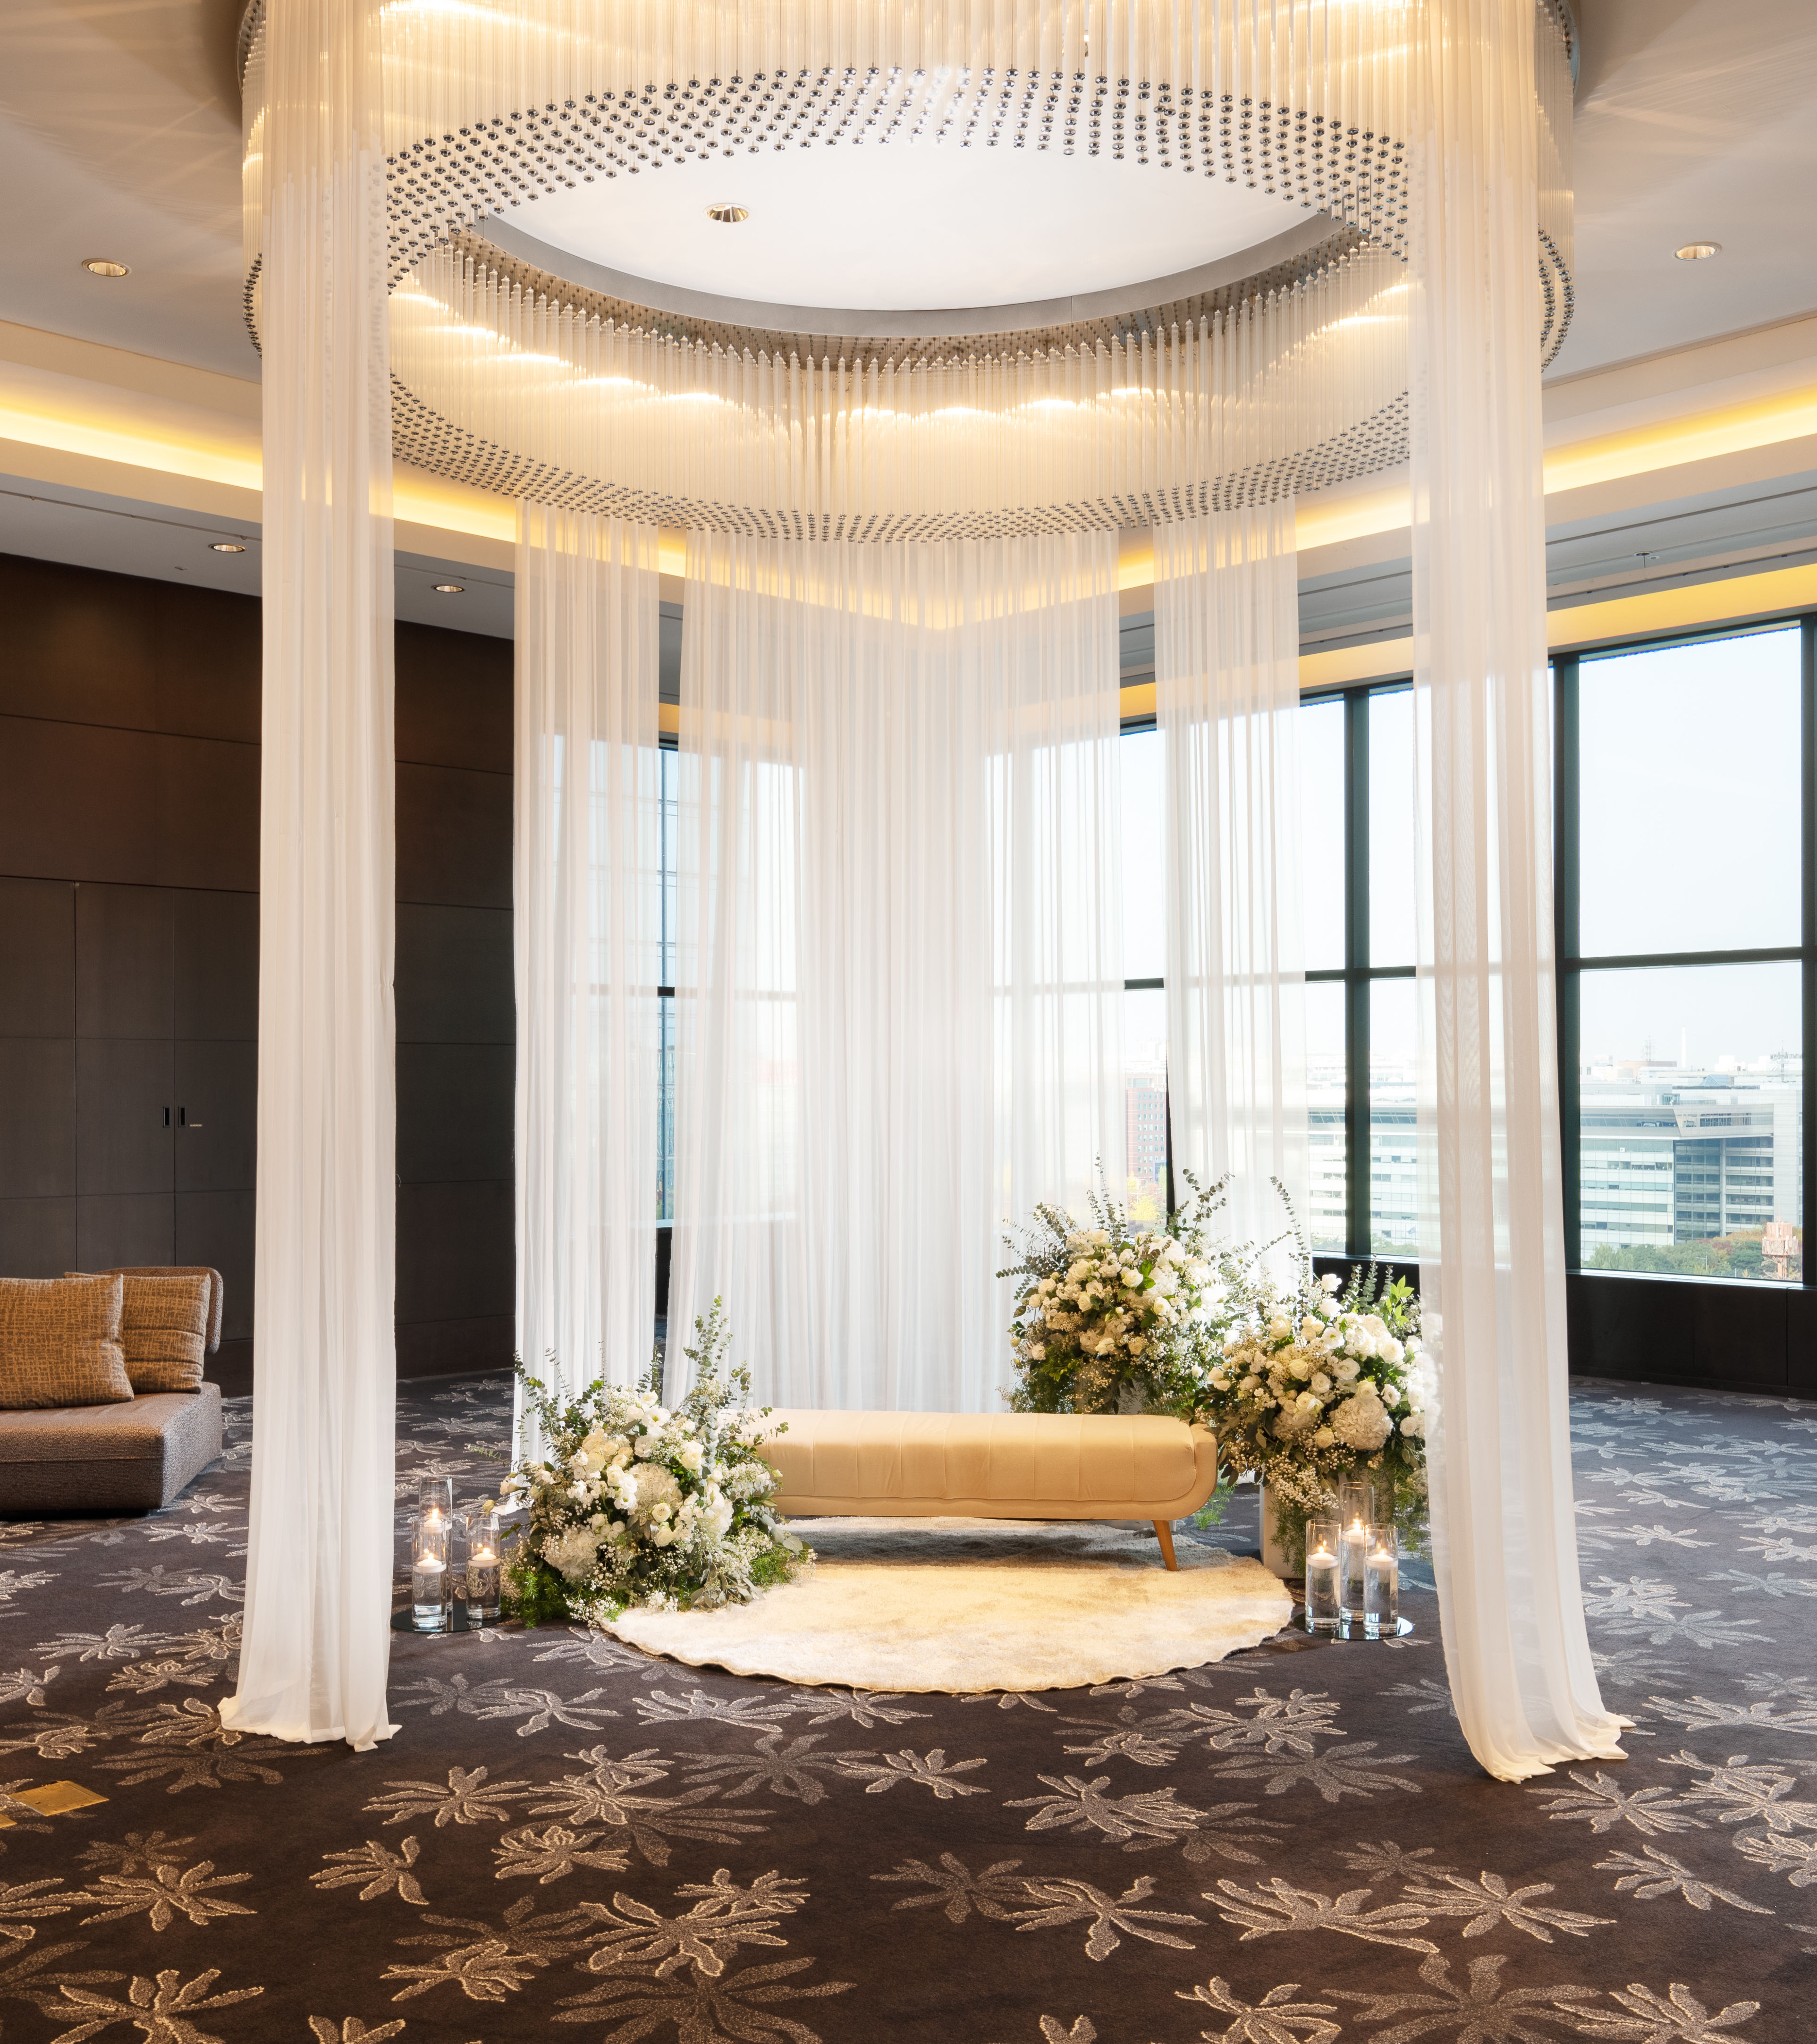 Bridal suite. Floor to ceiling windows light the beautifully decorated room. Sheer curtains and flowers surround a lounge couch in the center of the room.